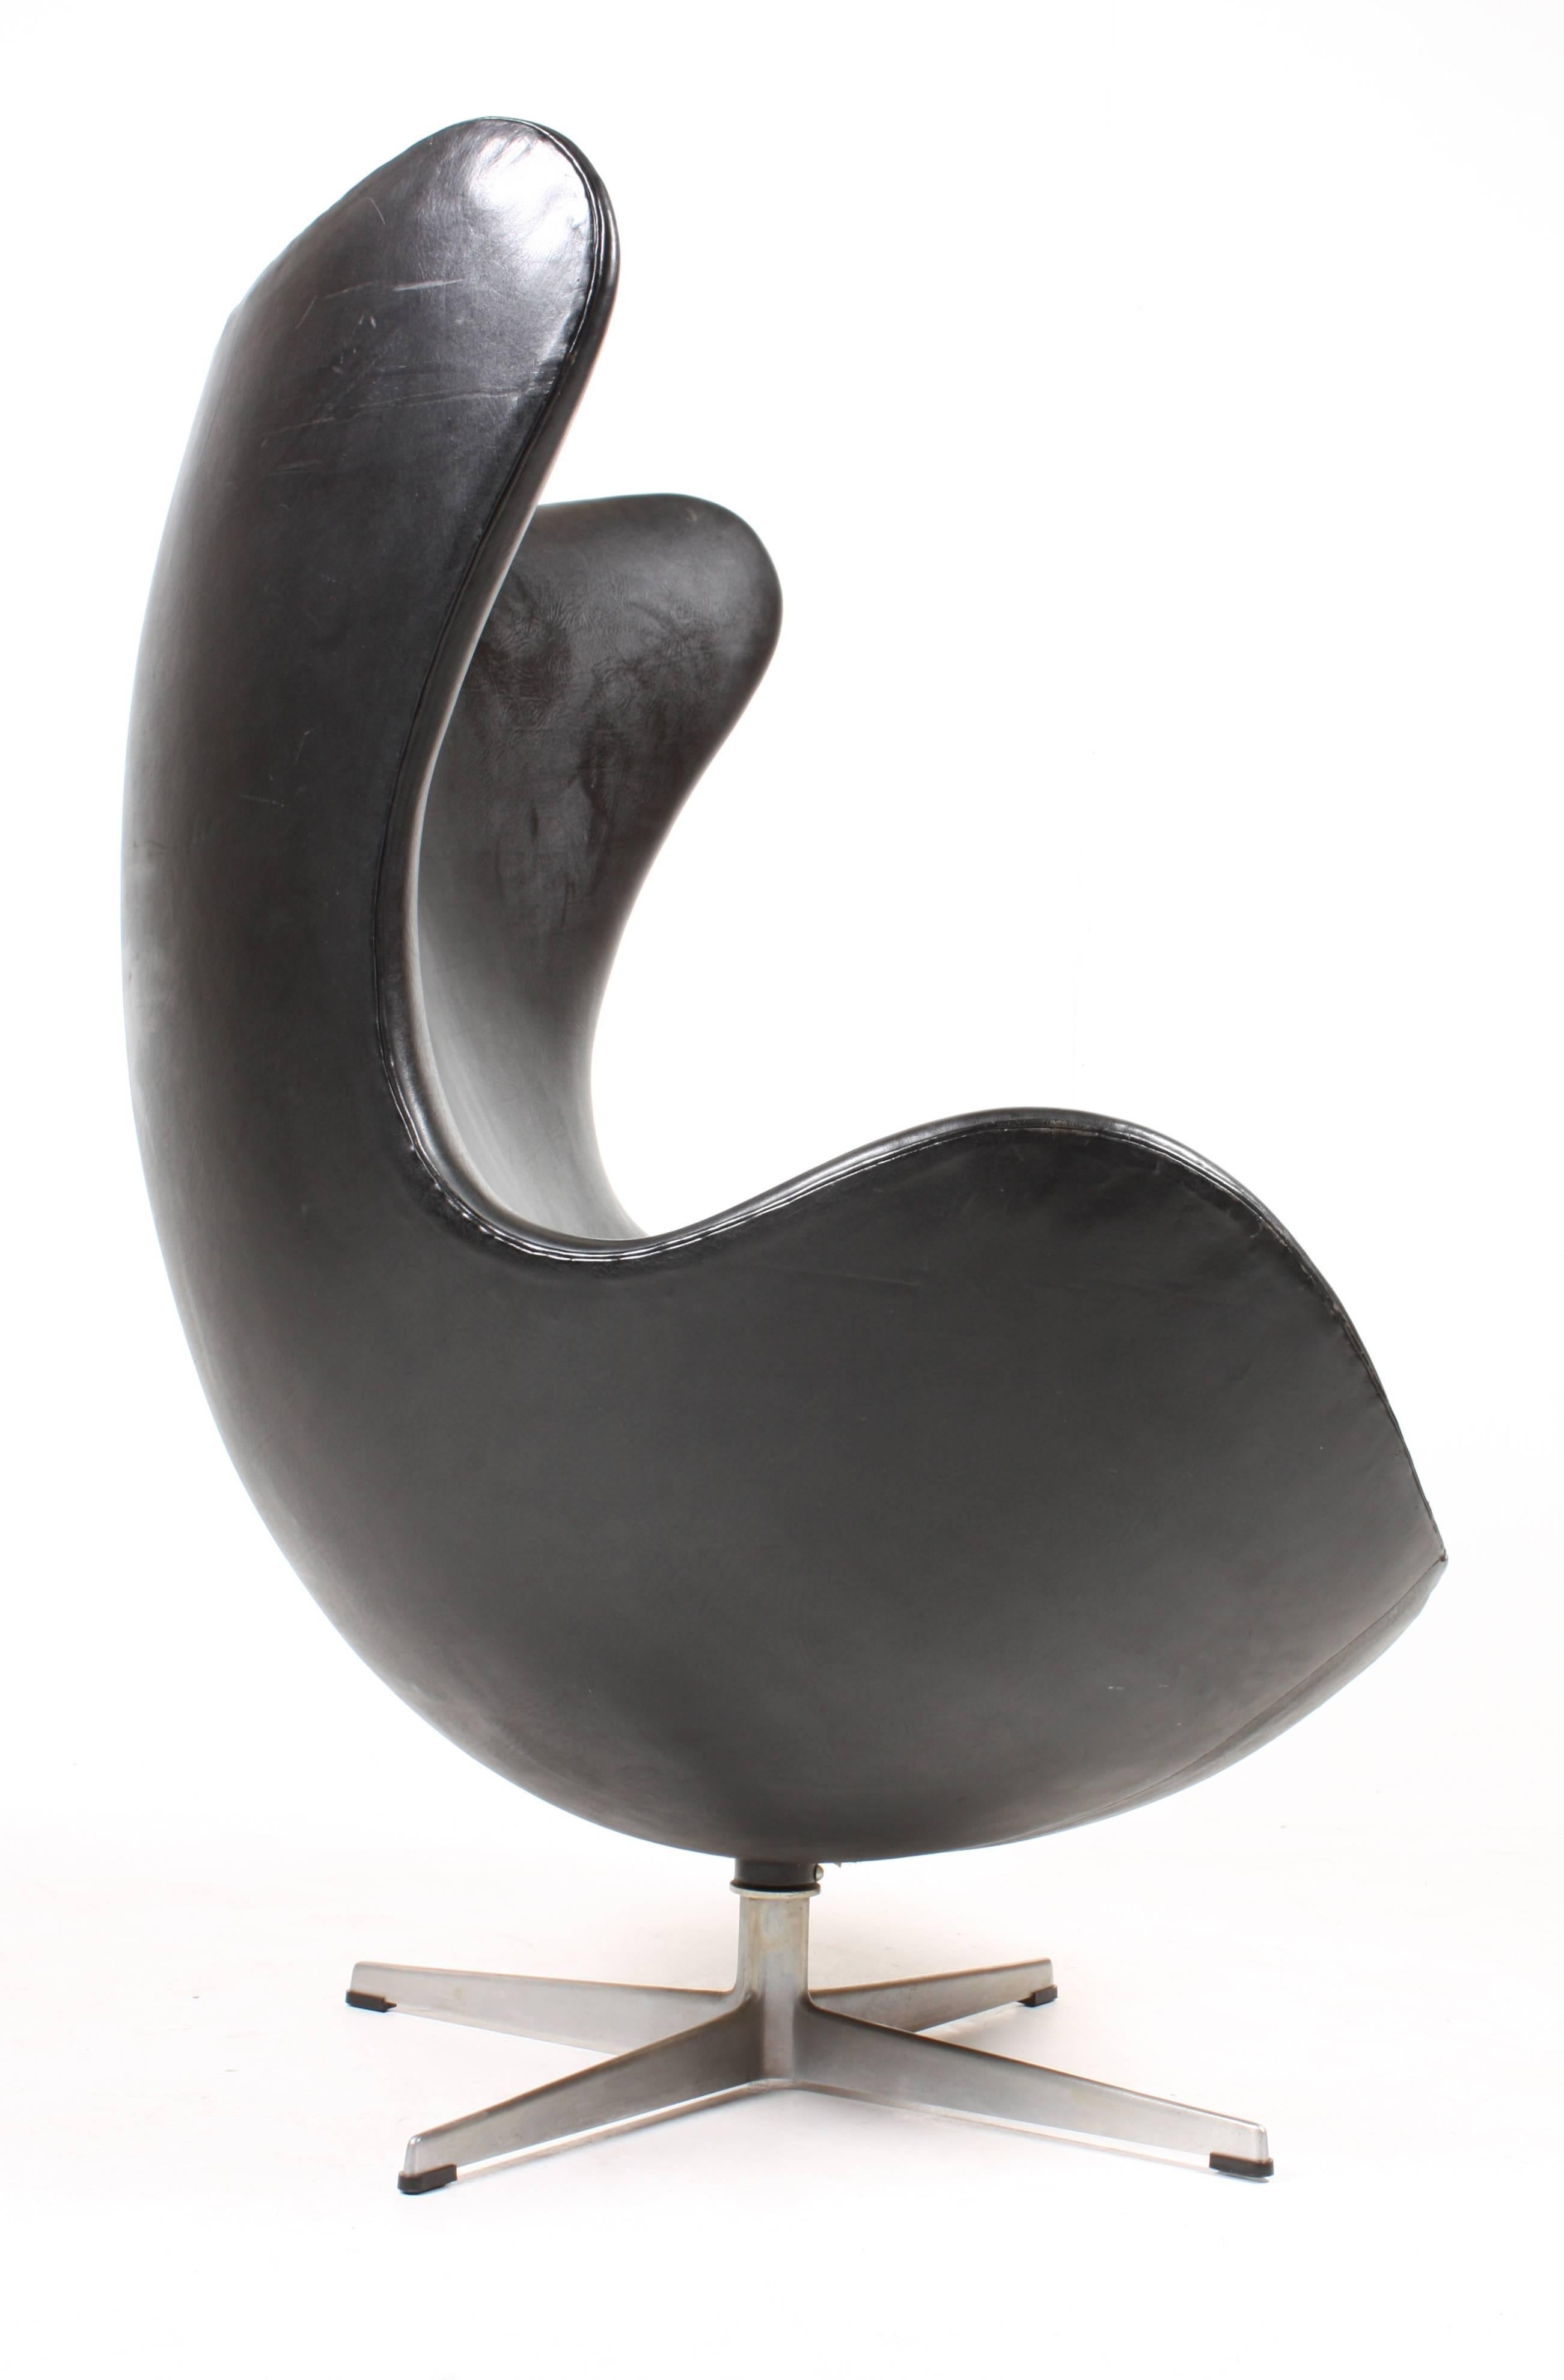 Egg chair in patinated black leather designed by Maa. Arne Jacobsen in 1958.
This chair is made in Denmark in 1970. The chair is in very good original condition.